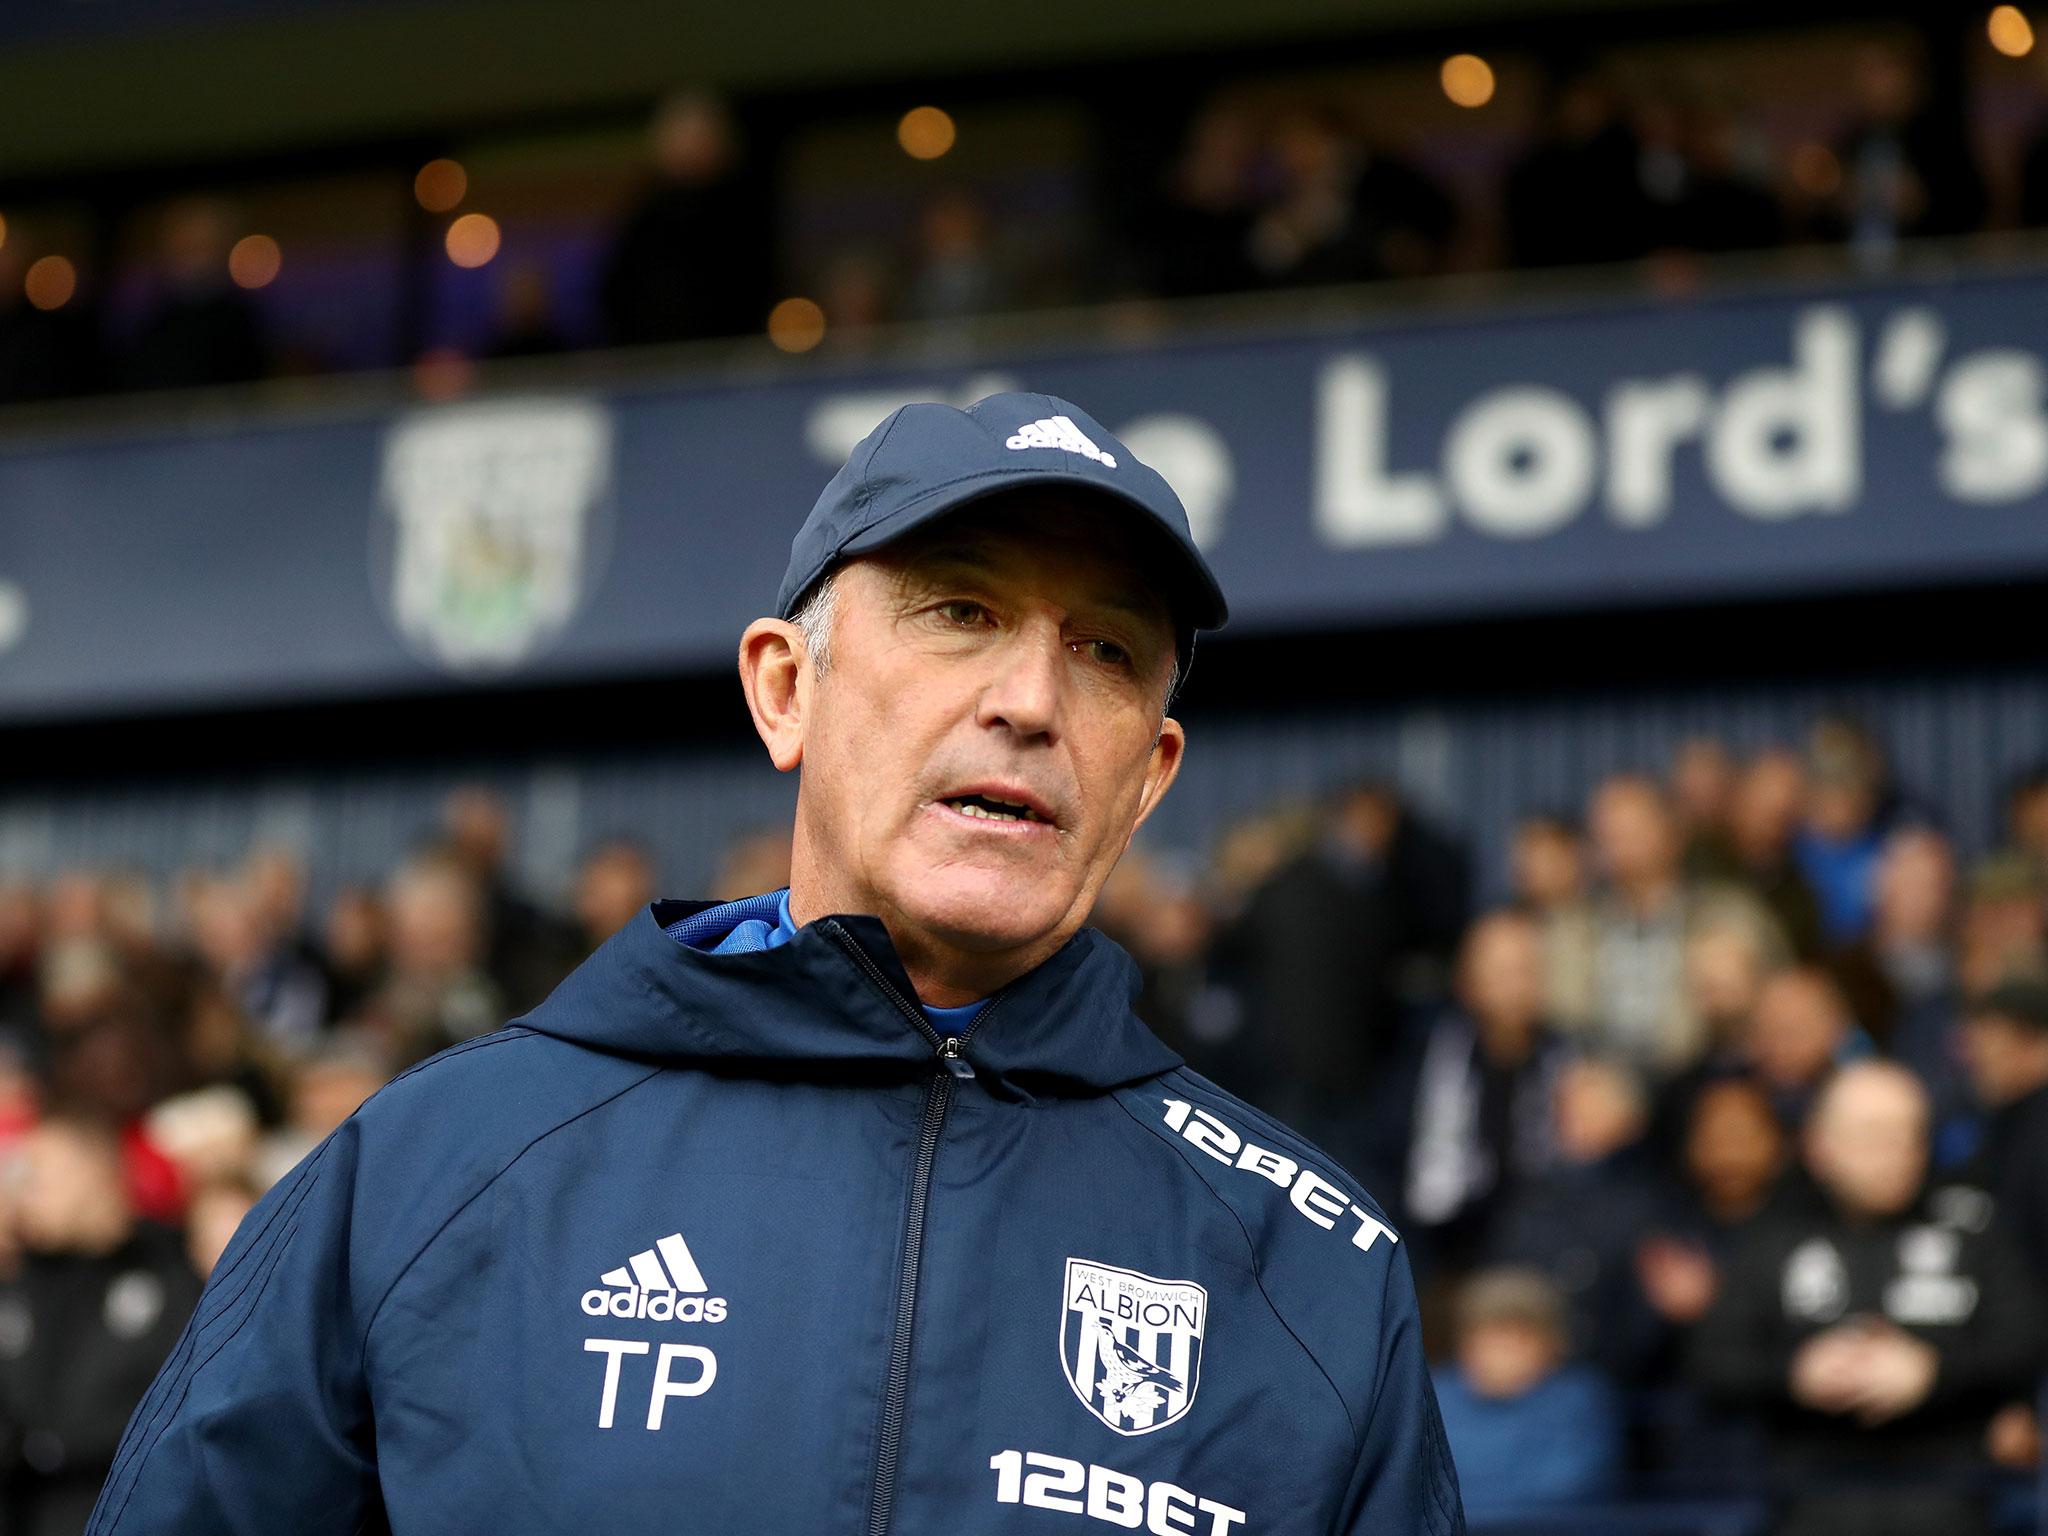 Tony Pulis' reputation for 'stability' does not mean West Brom should have stuck by him